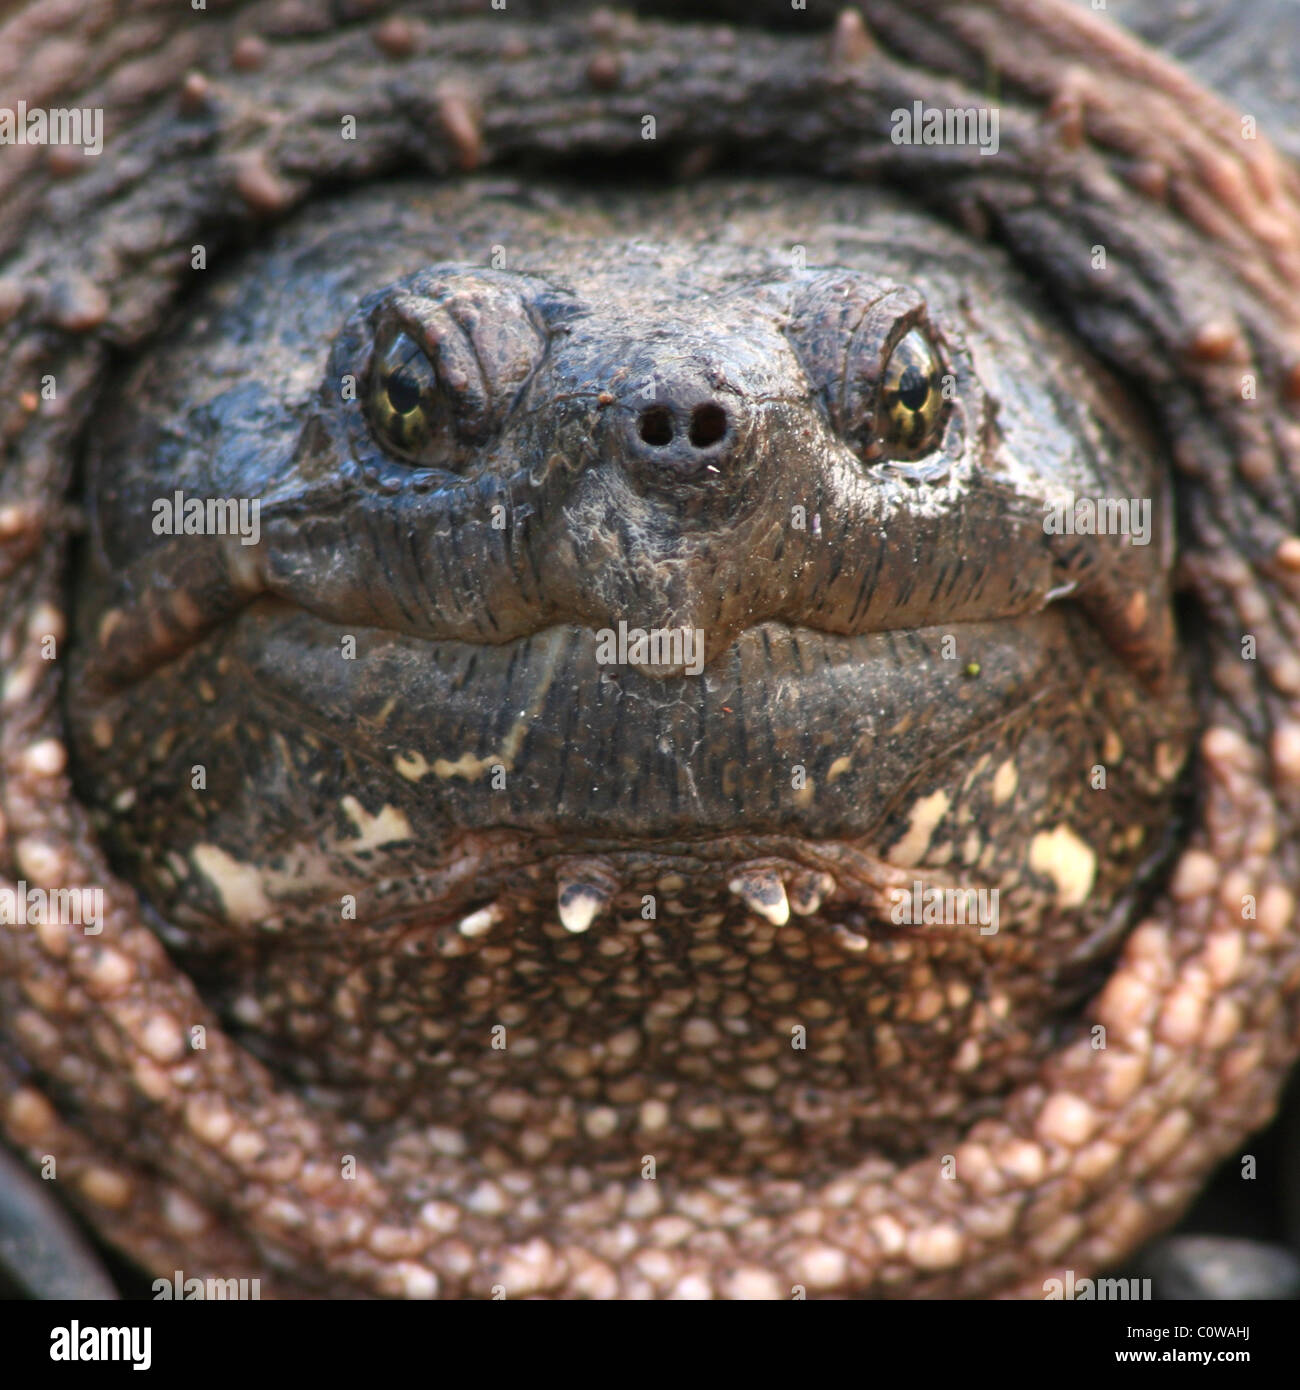 A portrait of a Snapping Turtle up close and personal. Stock Photo